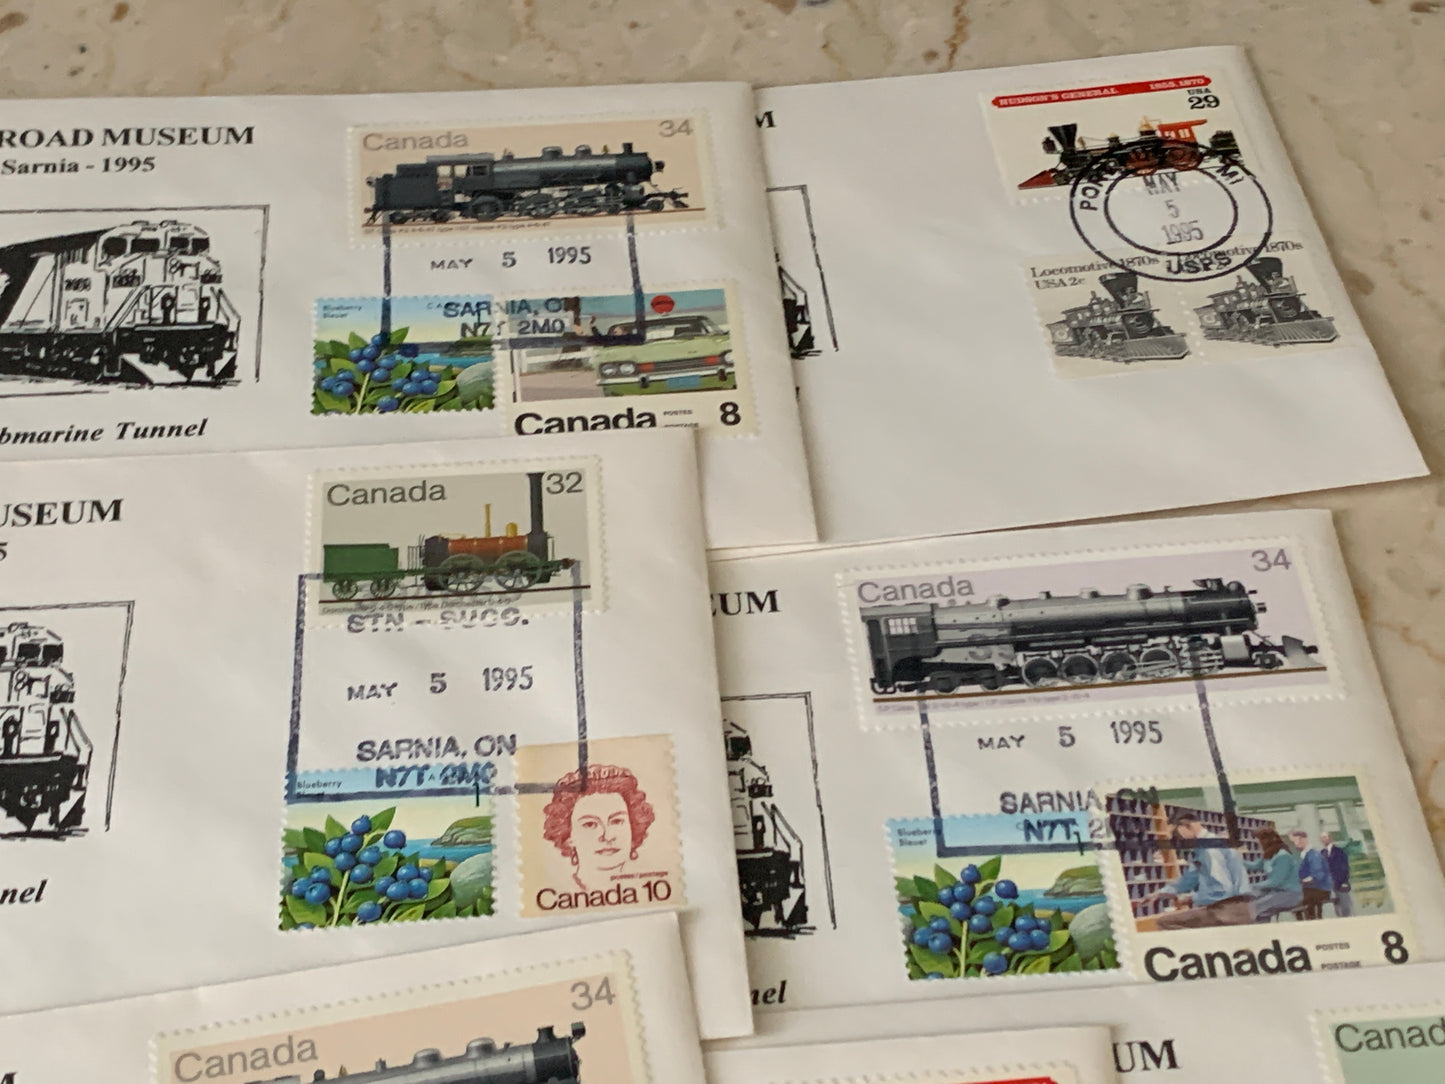 Bayview Railroad Museum Port Huron and Sarnia Stamps